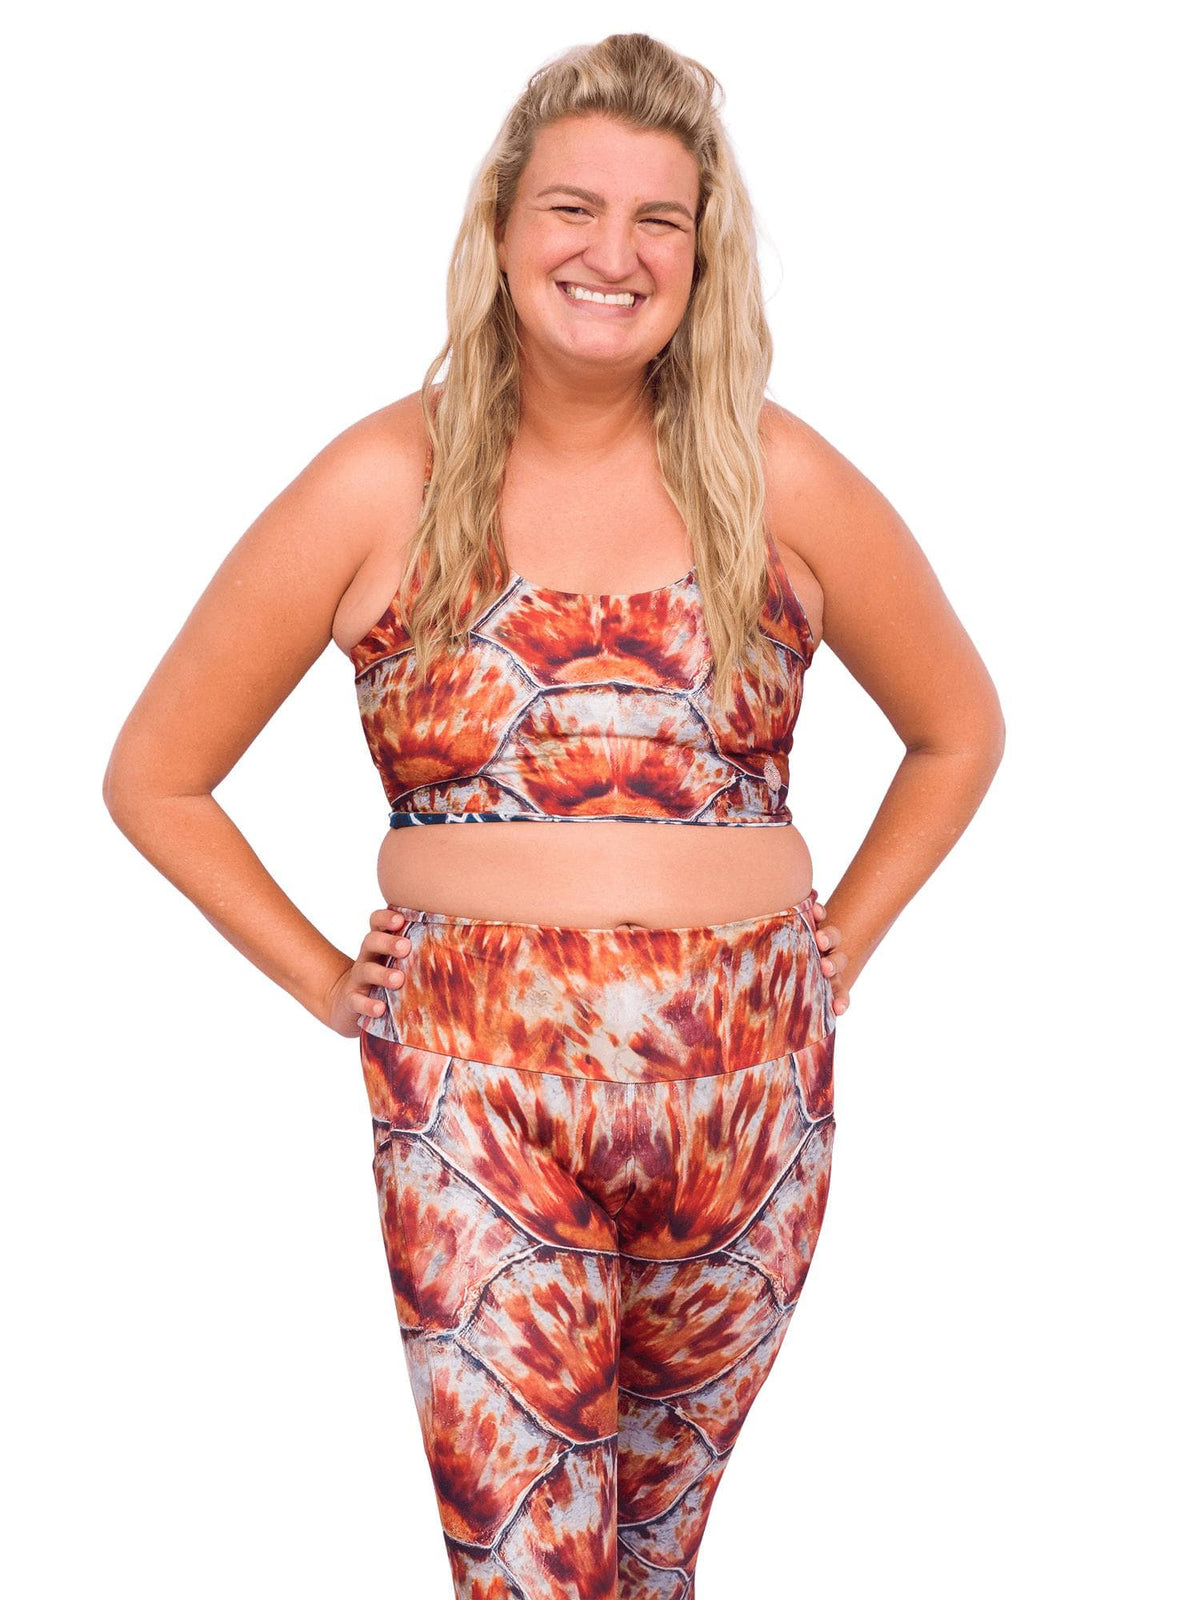 Model: Hannah is a sea turtle ambassador for Sea Turtle Adventures. She is wearing a size L.